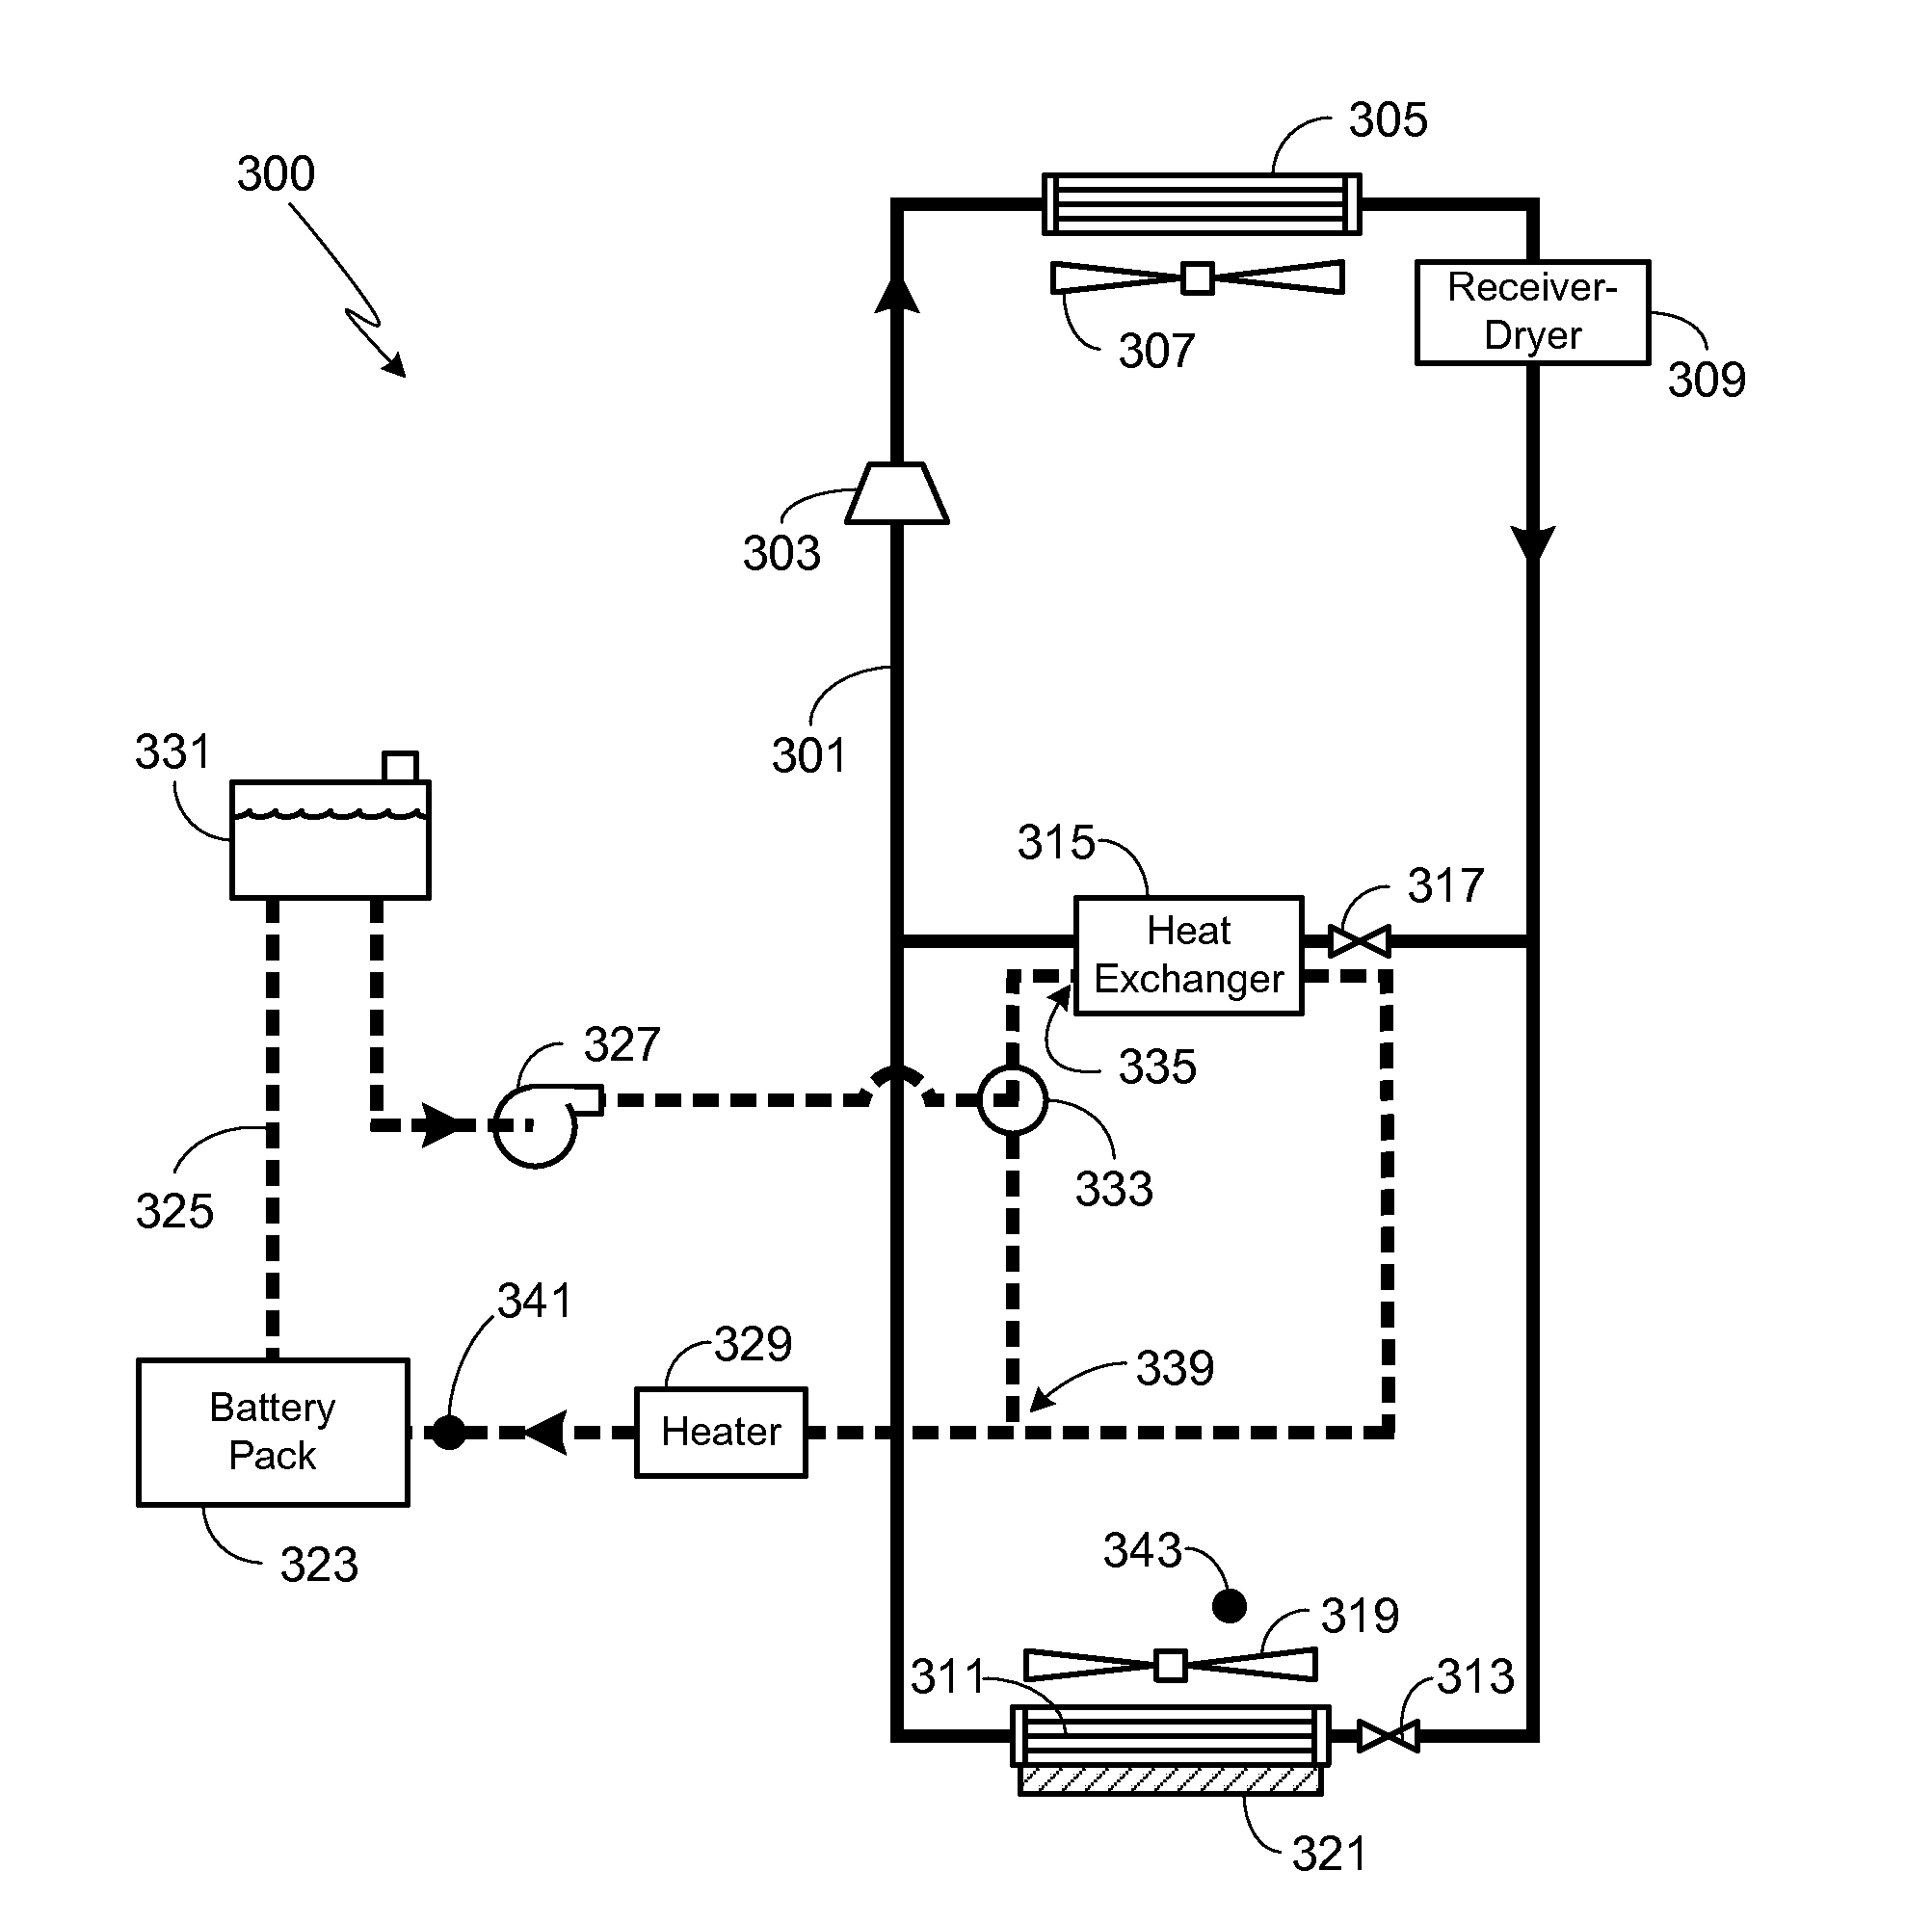 Thermal Management System with Heat Exchanger Blending Valve